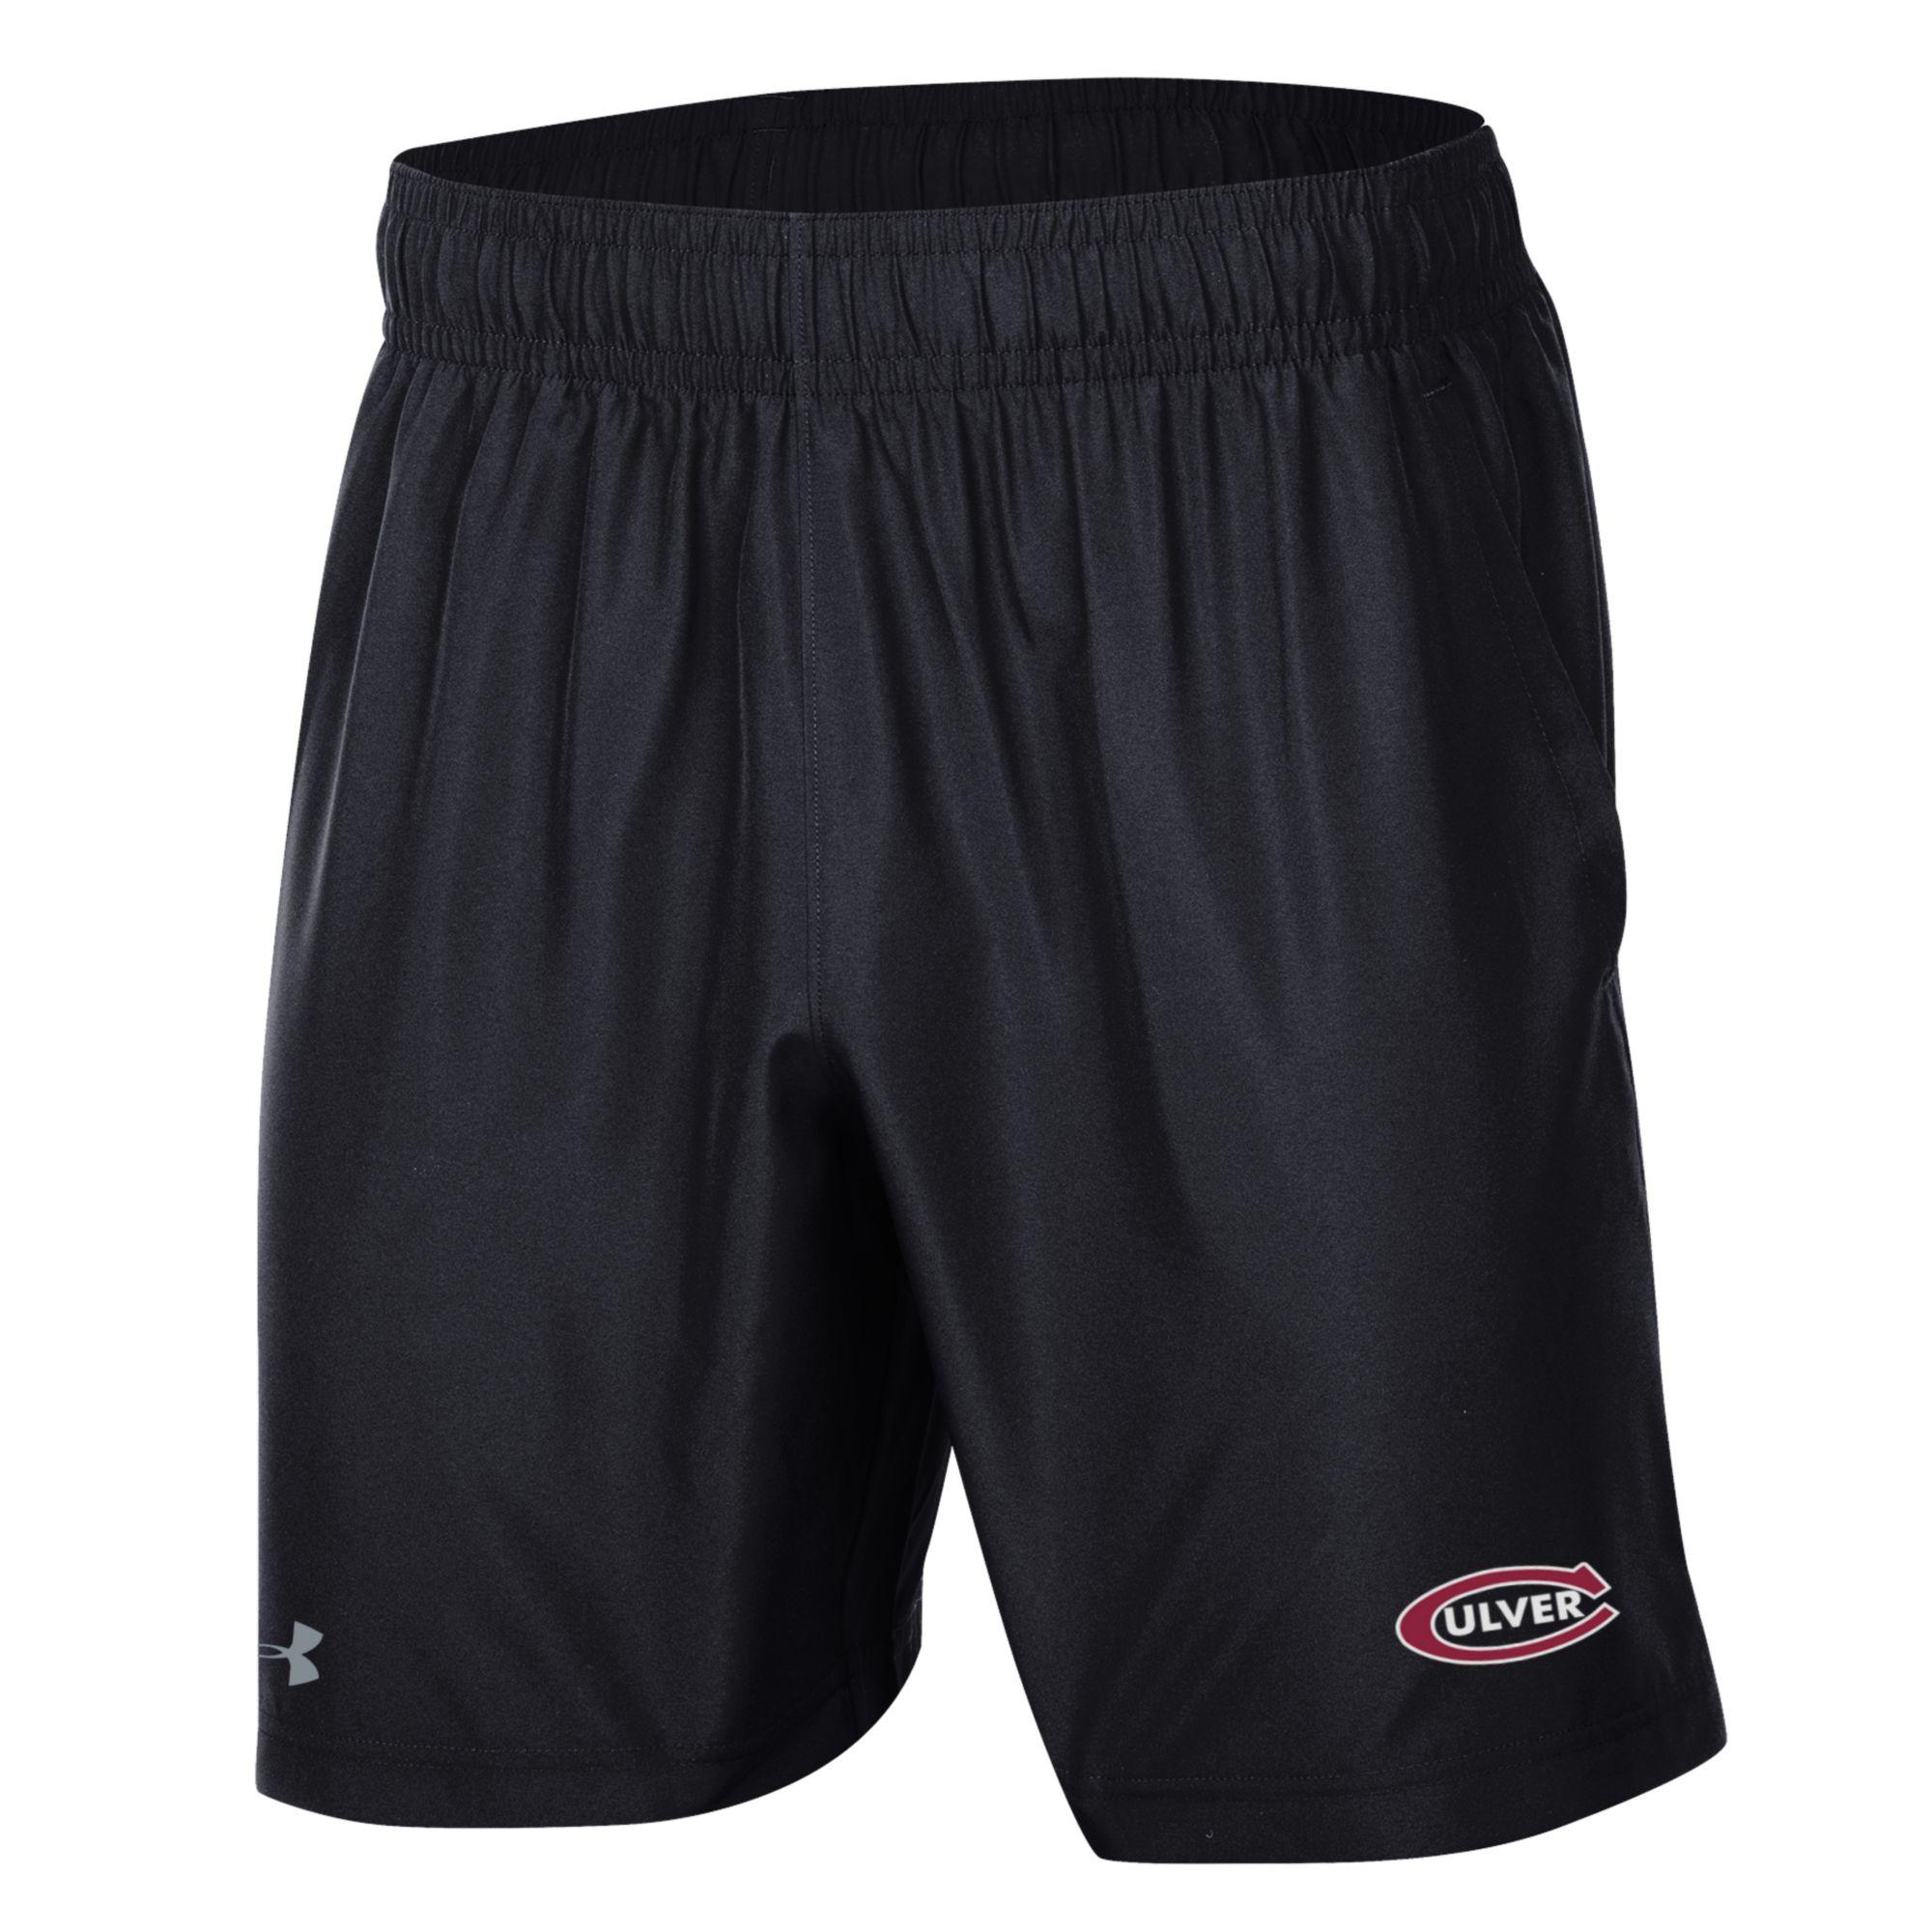 Under Armour Mens Woven Shorts - Black